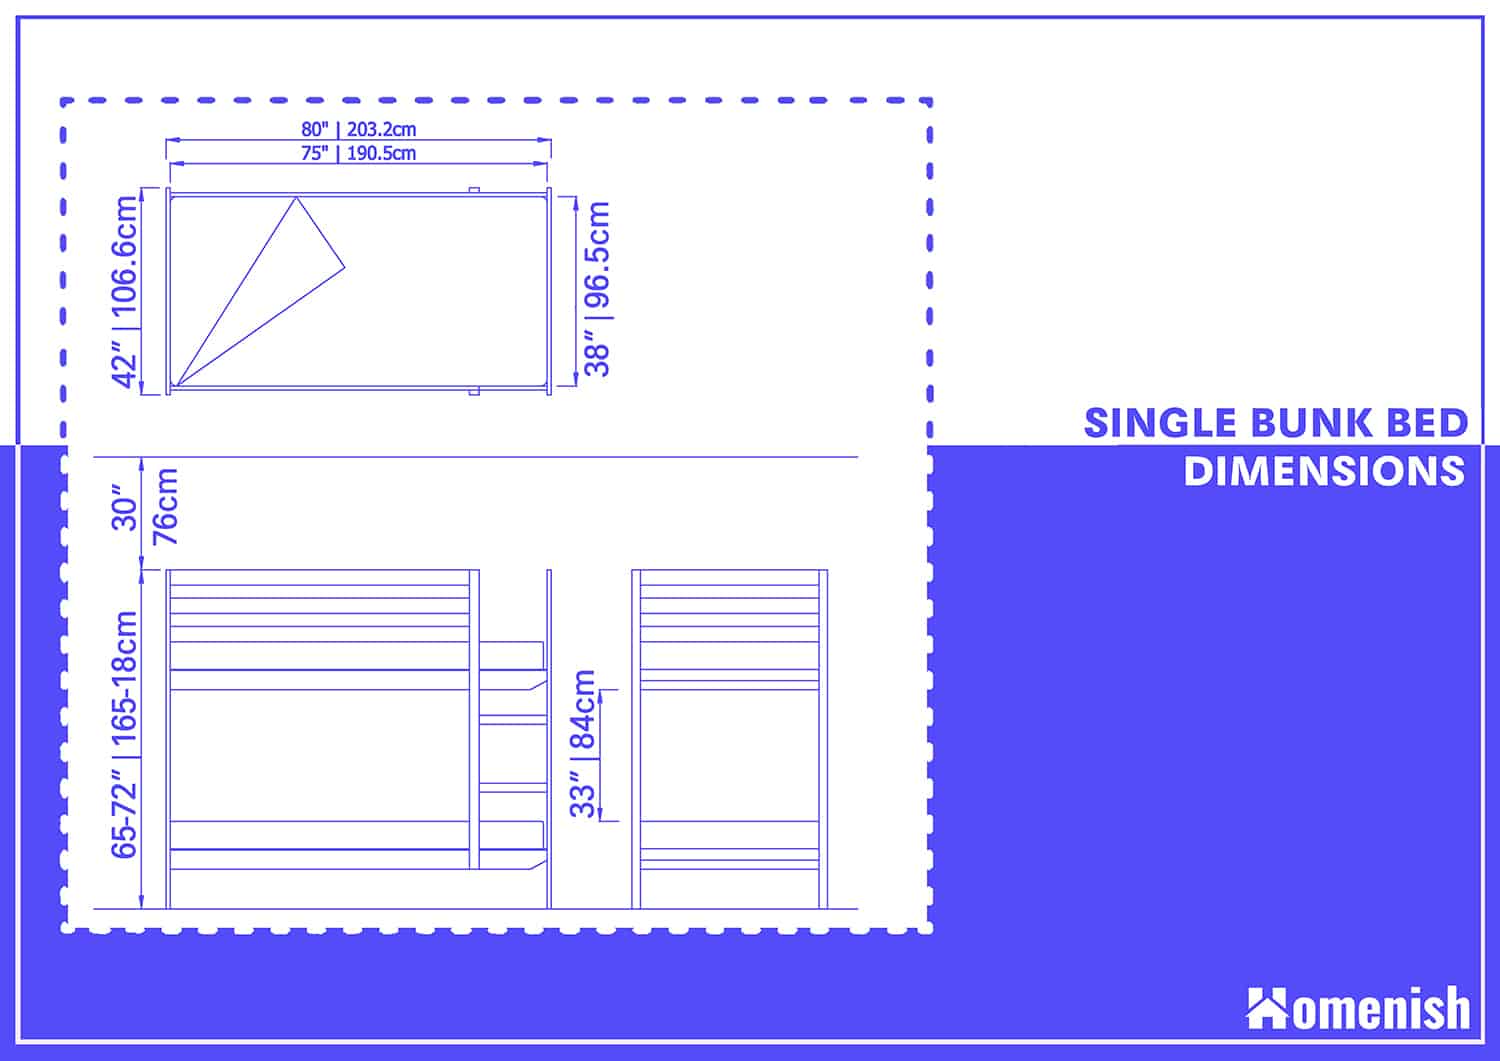 Standard Bunk Bed Dimensions With 3, Typical Bunk Bed Dimensions